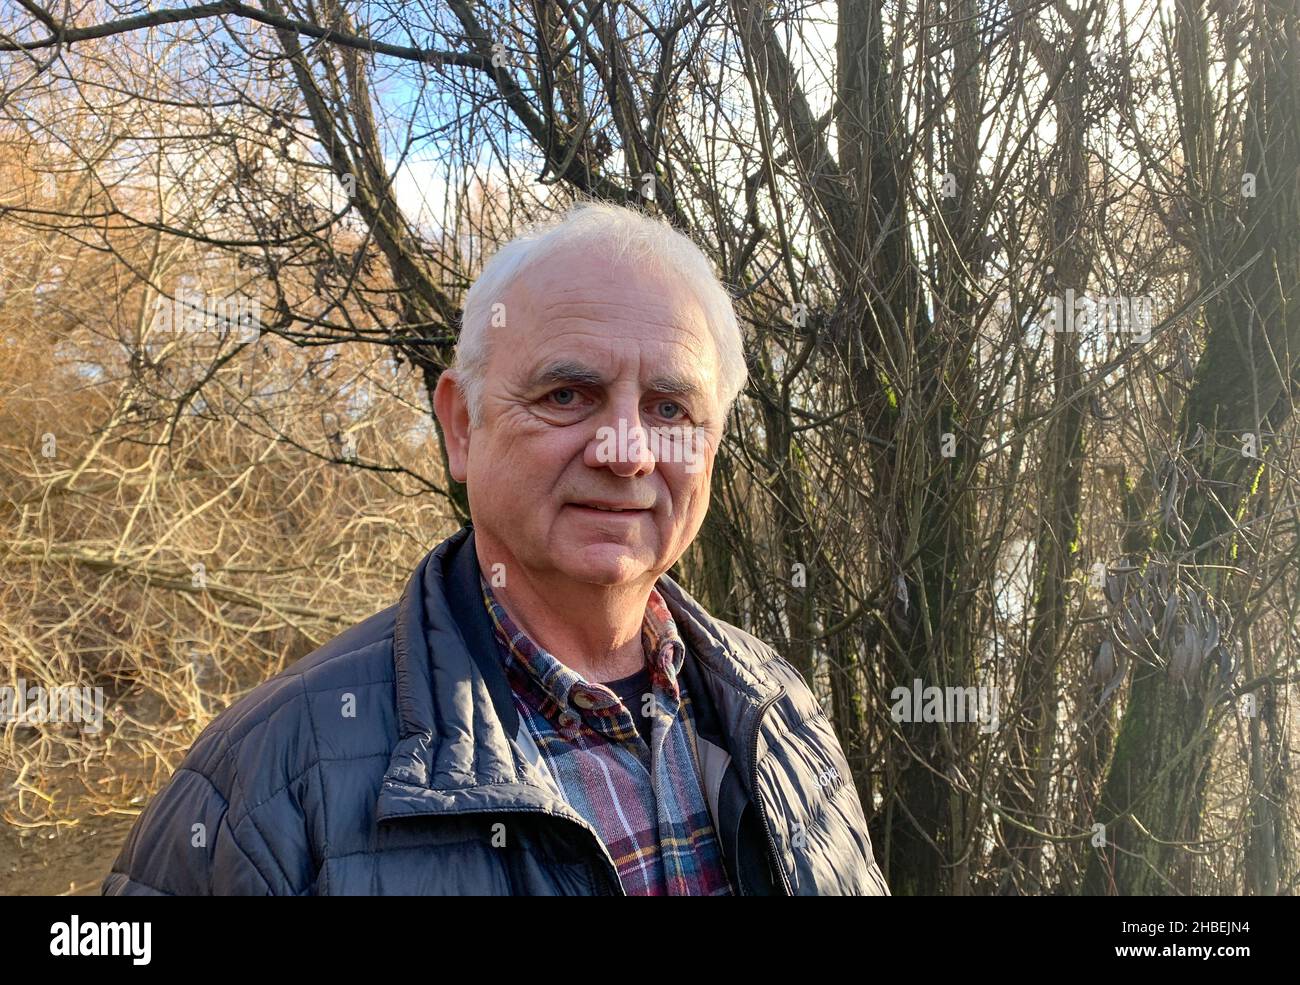 Portrait of a man wearing a puffer jacket standing in rural landscape, British Columbia, Canada Stock Photo